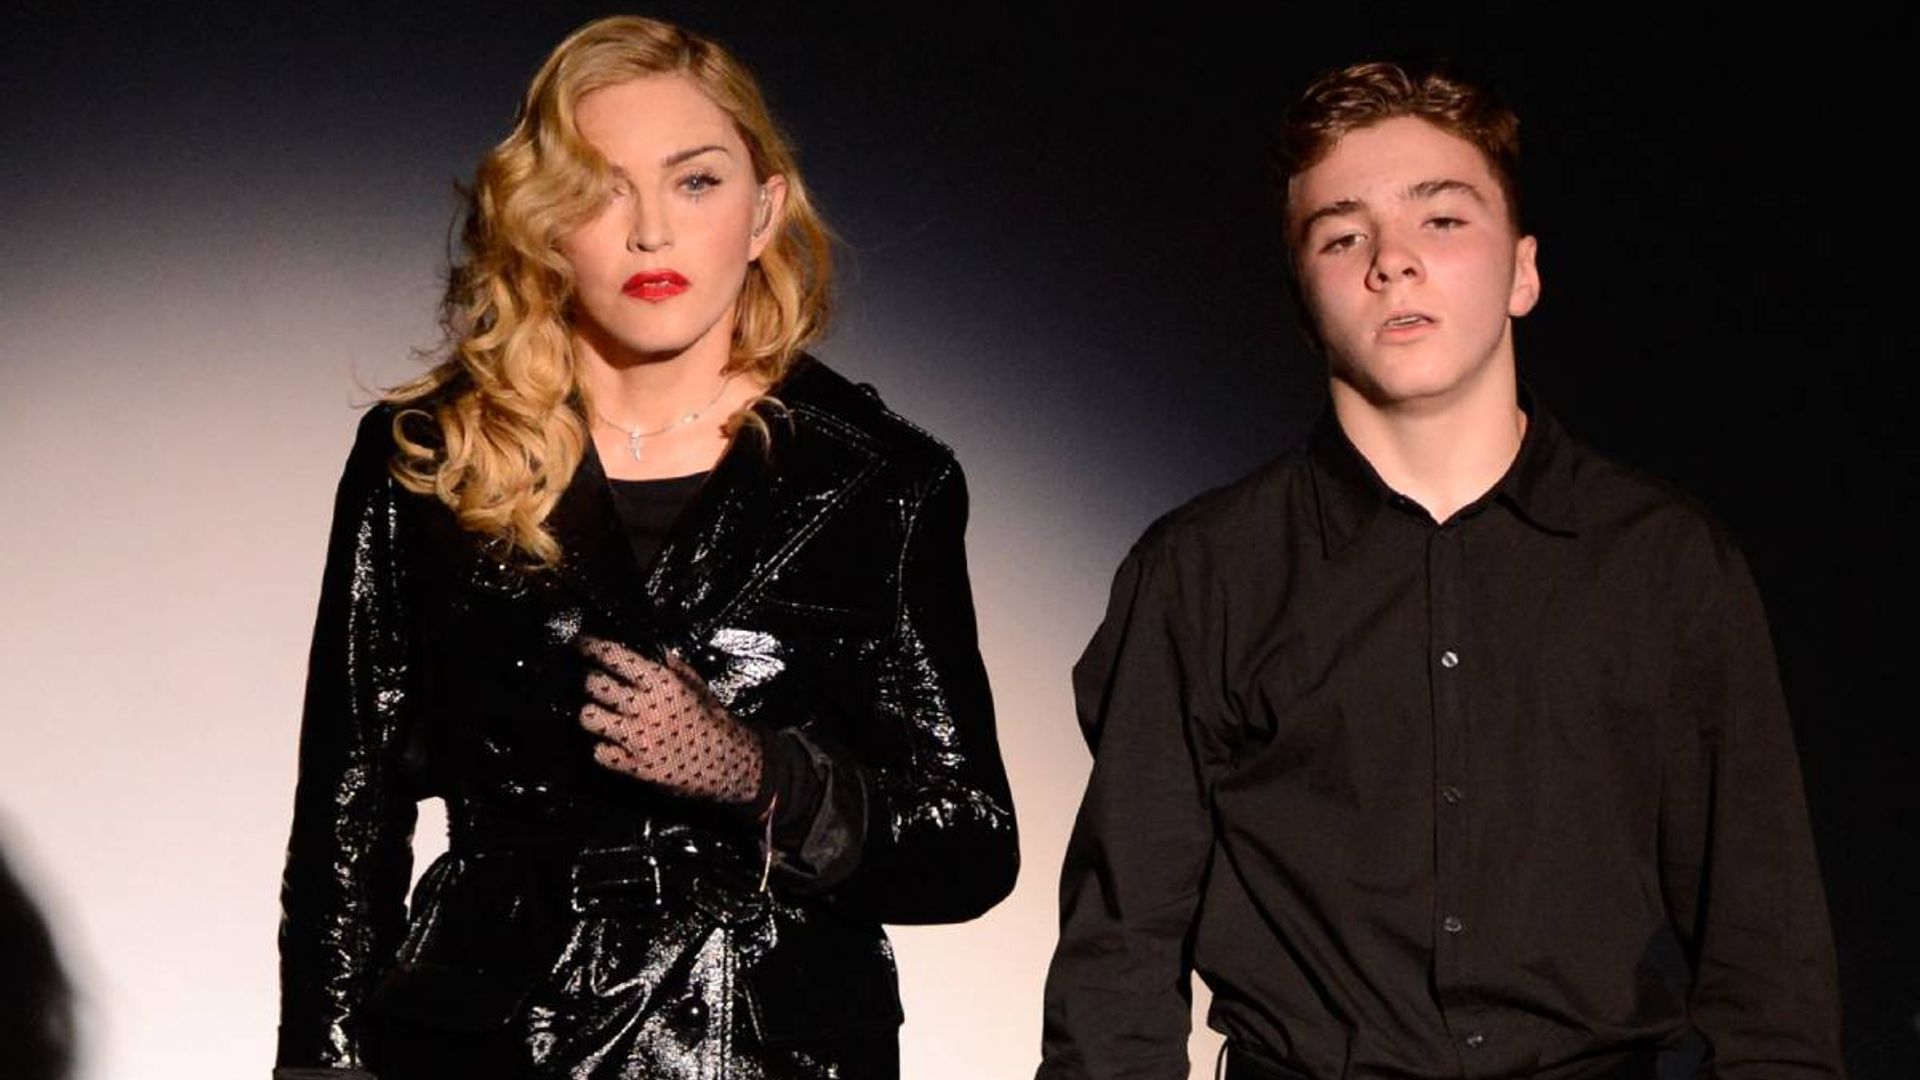 Madonna shares incredibly rare photos with son Rocco to mark special occasion